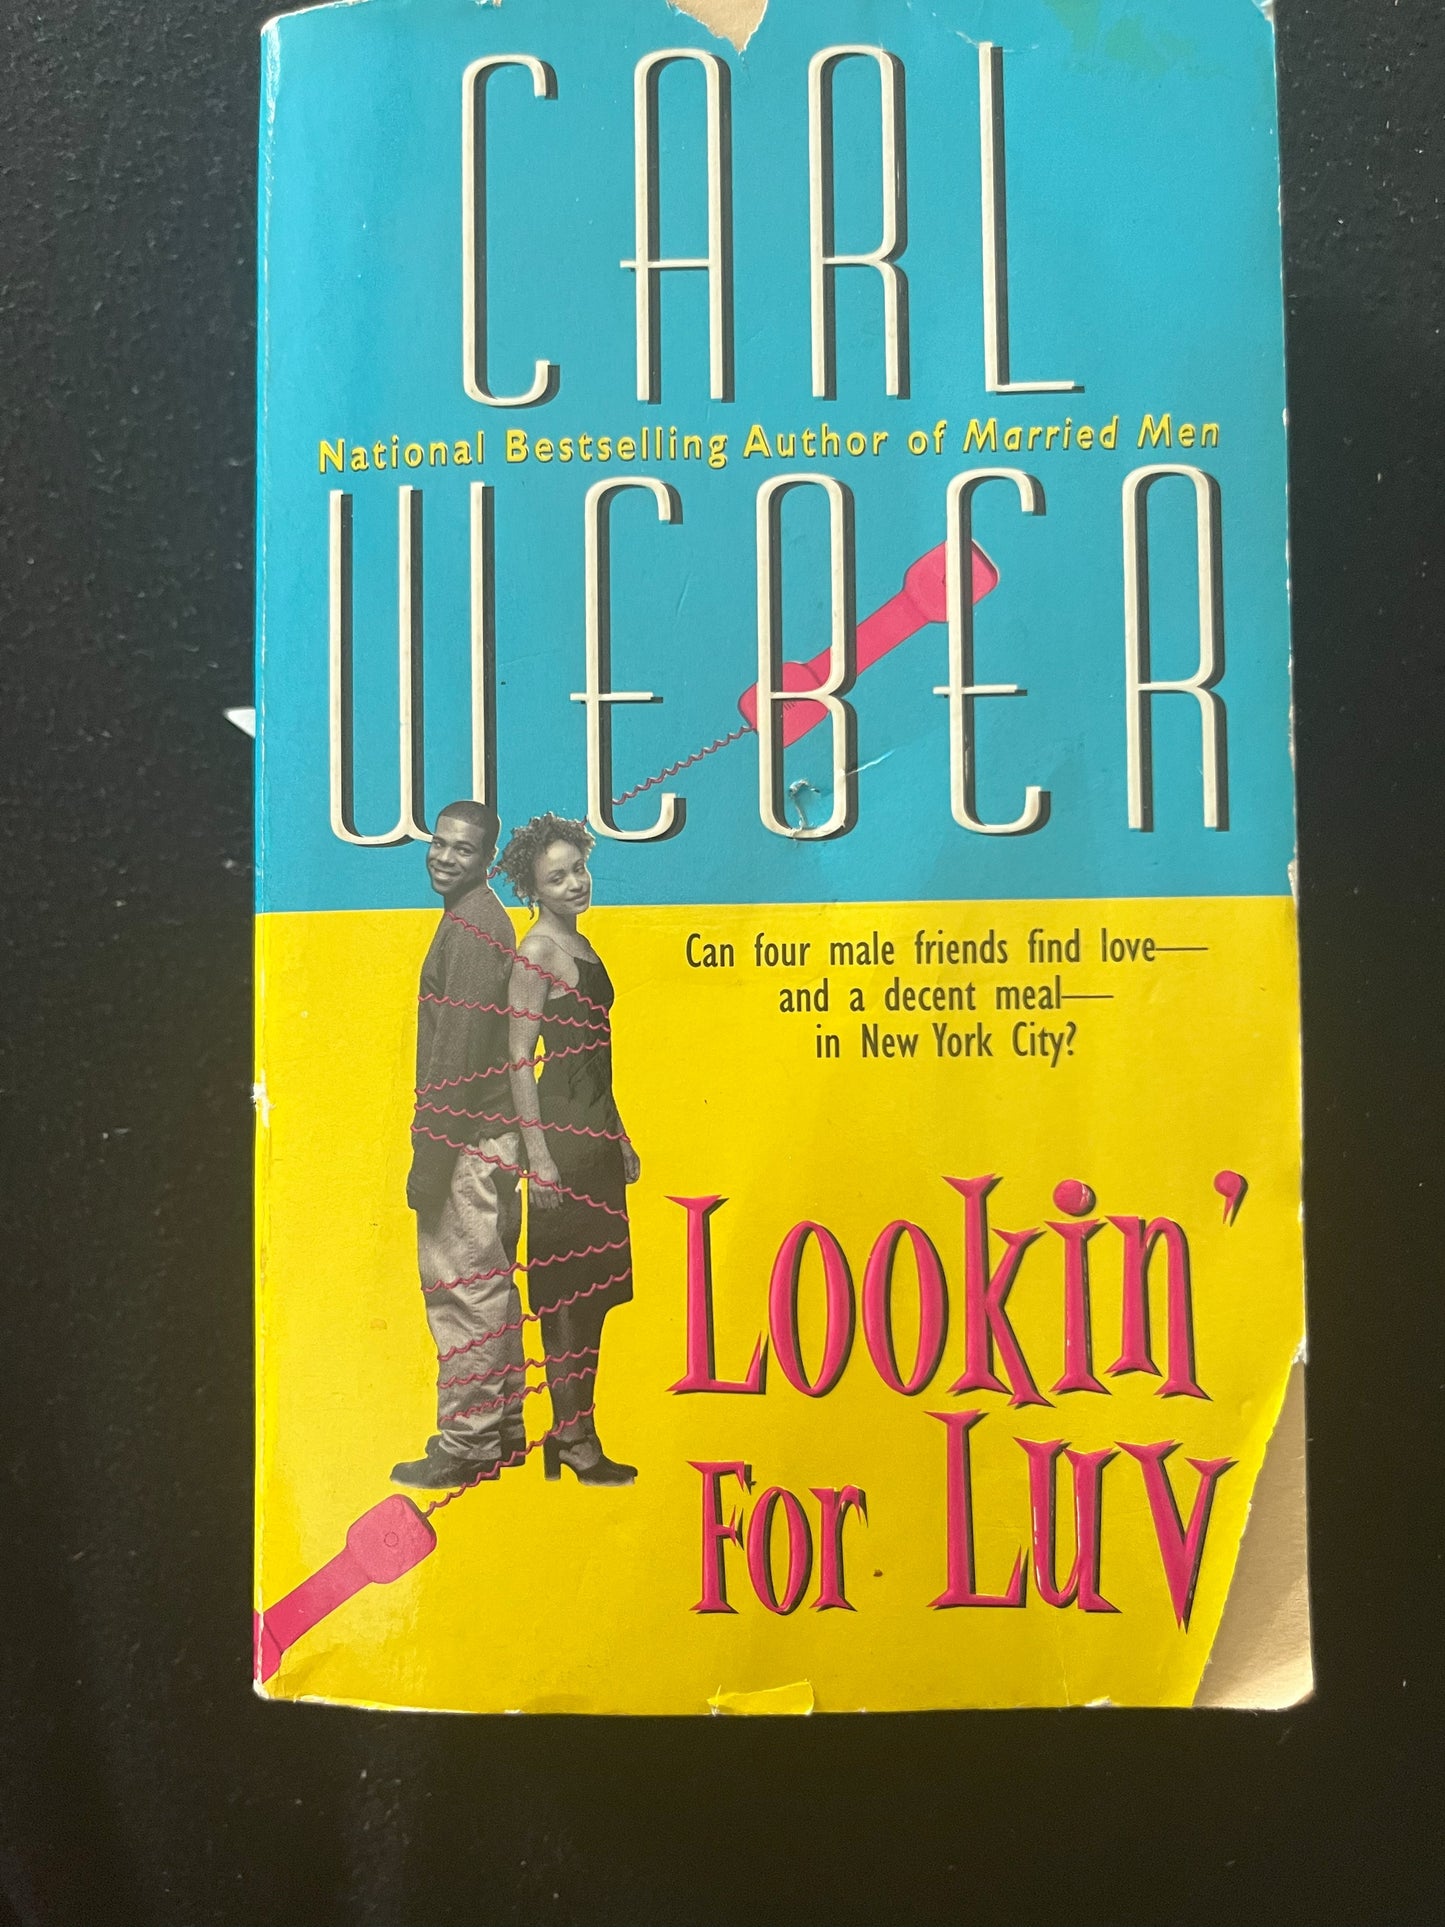 LOOKIN' FOR LUV by Carl Weber